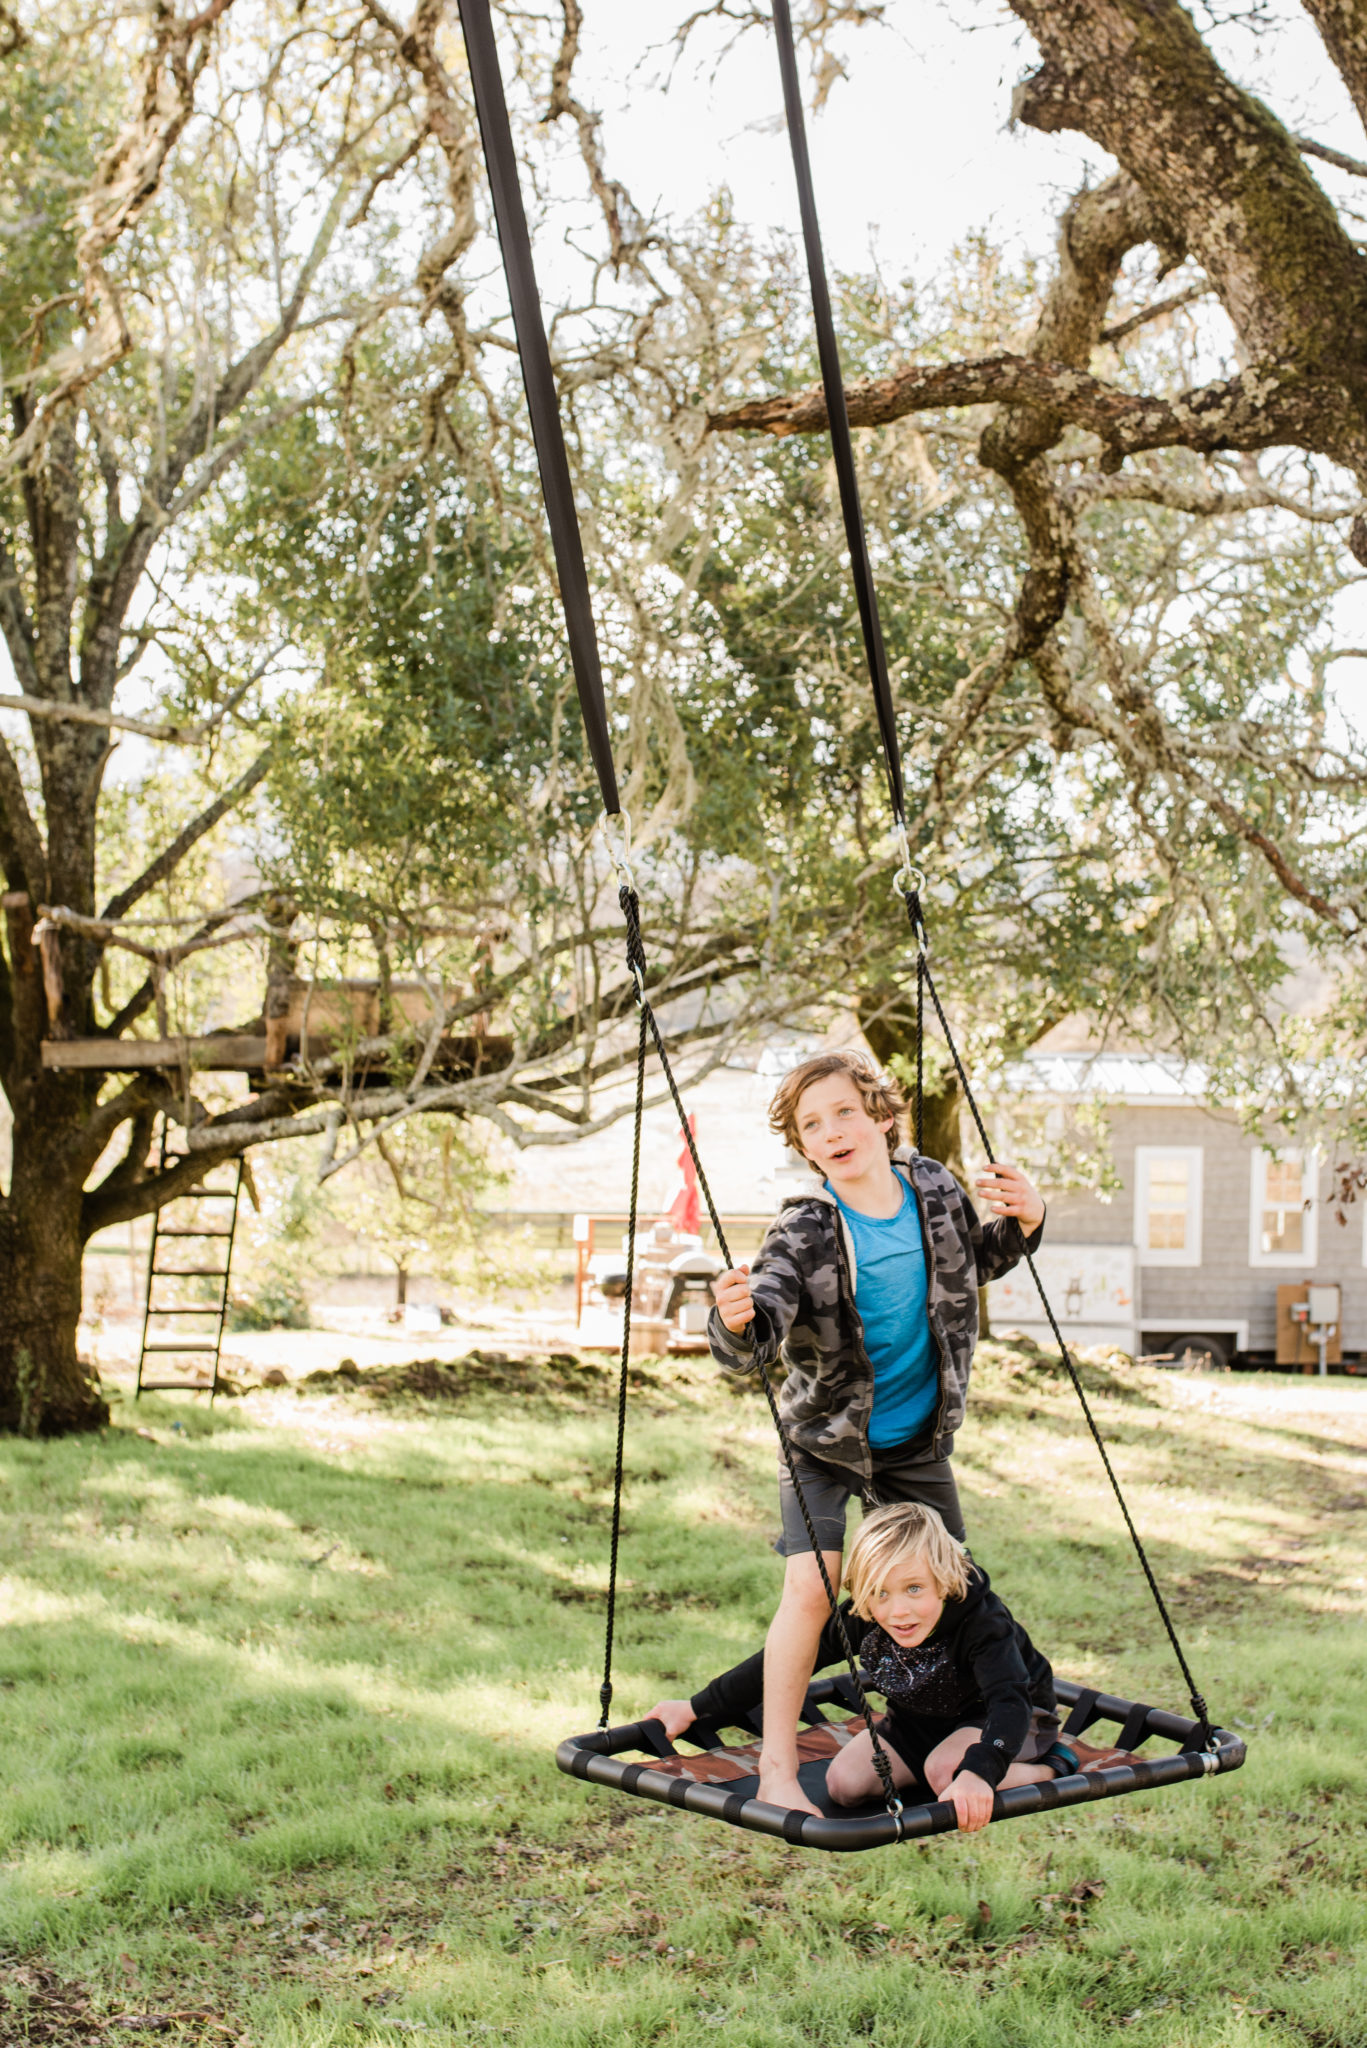 Toby and Kai spend most of their days outside swinging through the trees, playing in their treehouse, biking, and all things outdoors.